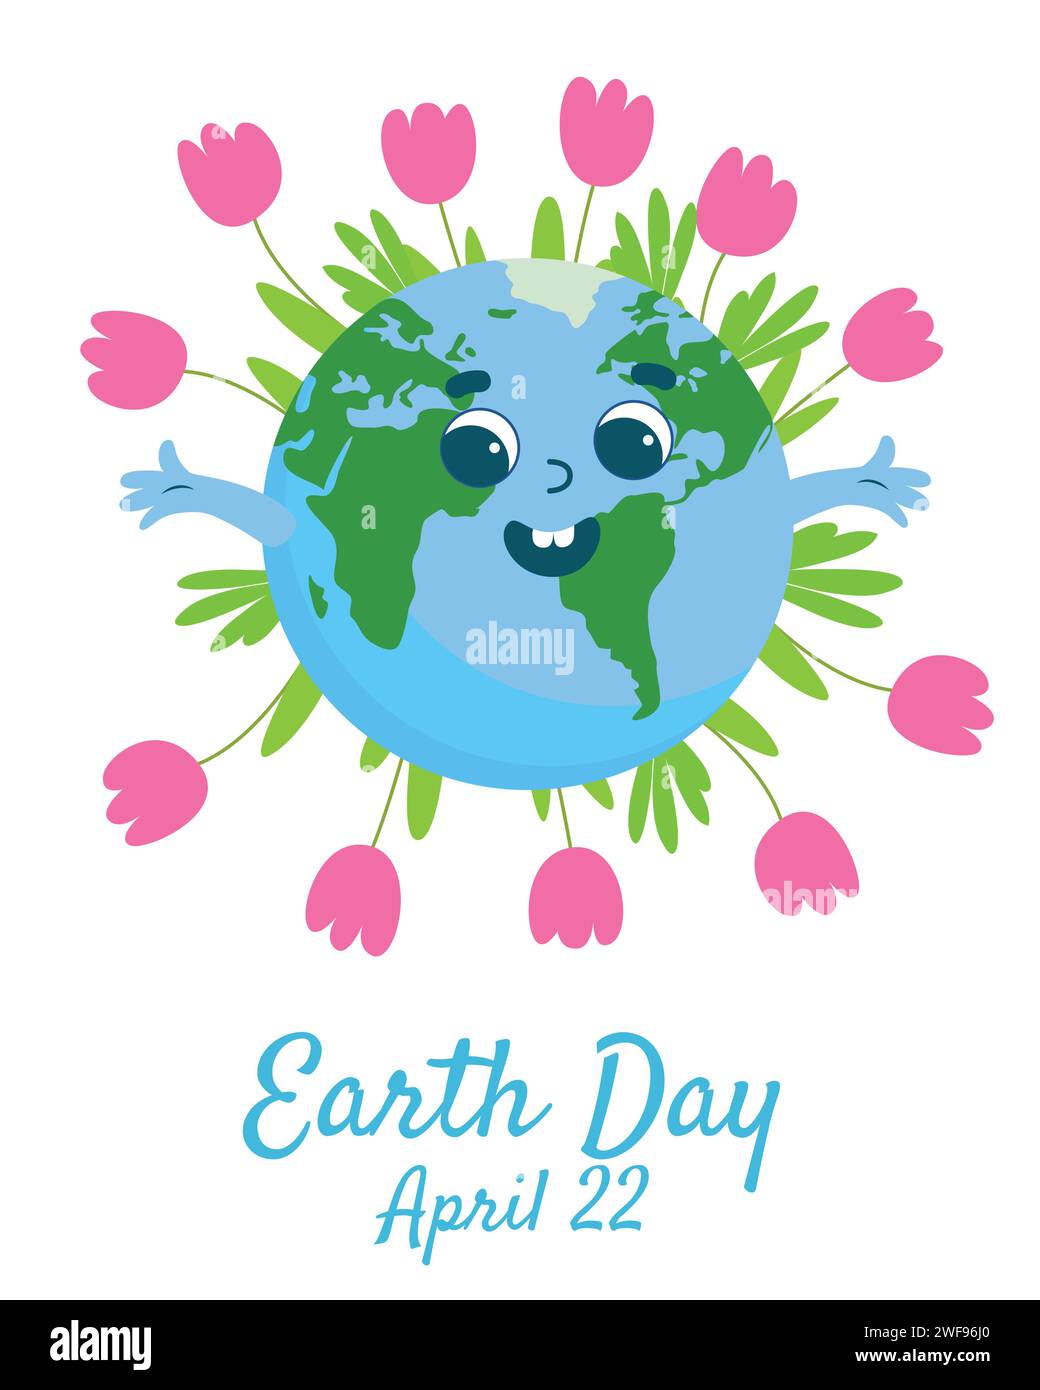 Earth Day greeting card. Planet Earth with a cheerful face is smiling joyfully with tulip flowers next to it. Stock Vector